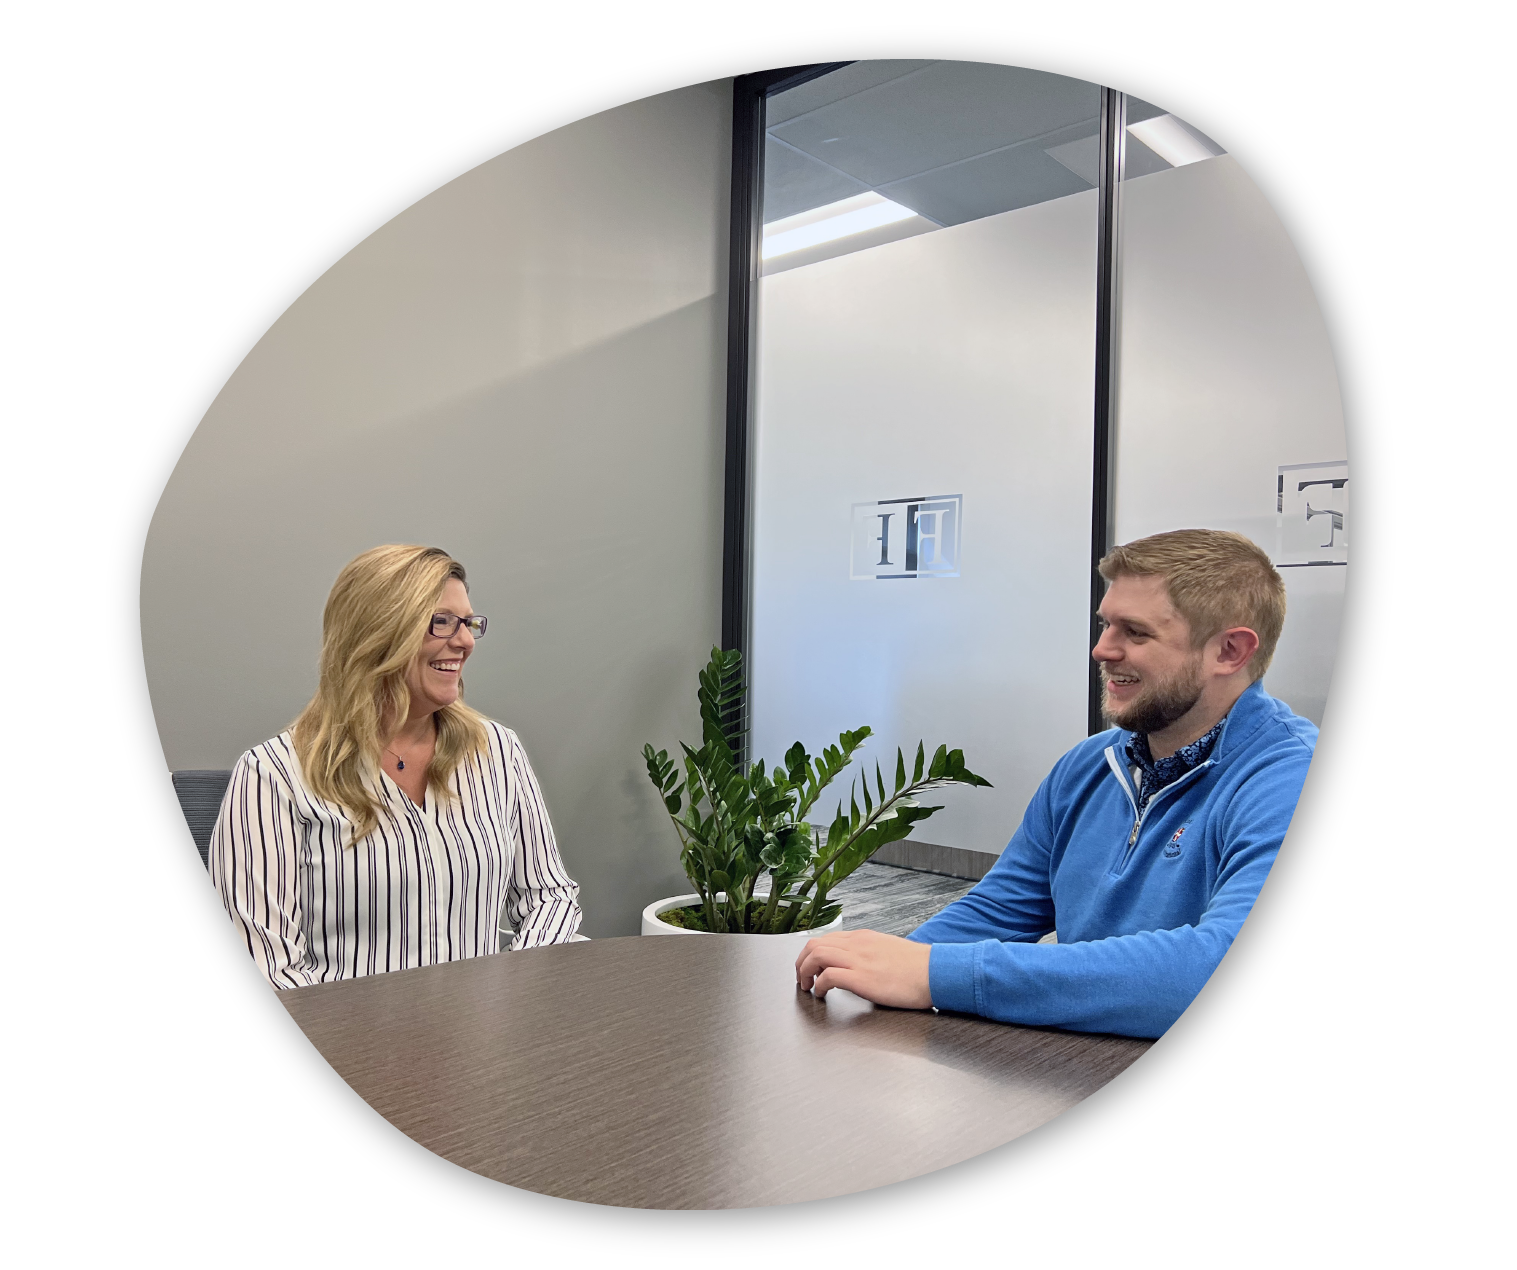 Founders administrative support team members in meeting space with plant and frosted glass smiling